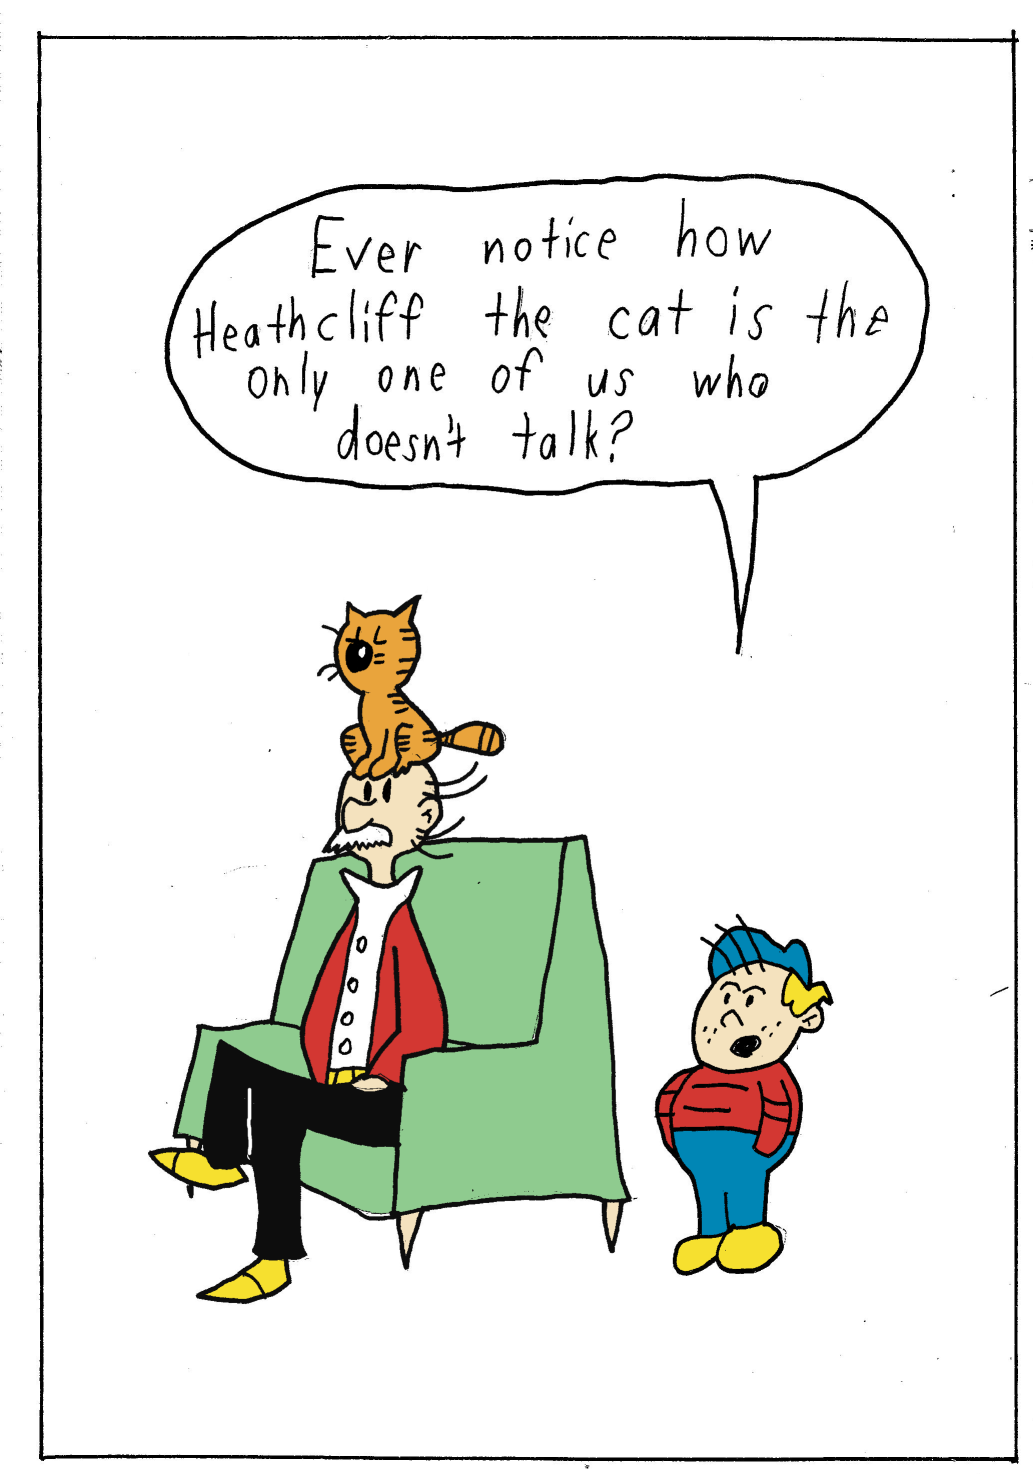 Noteworthy Heathcliff character Iggy says to his Grandpa, who has Heathcliff the cat resting on his head, Grandpa, did you ever notice Heathcliff the cat is the only one of use that doesn't talk?